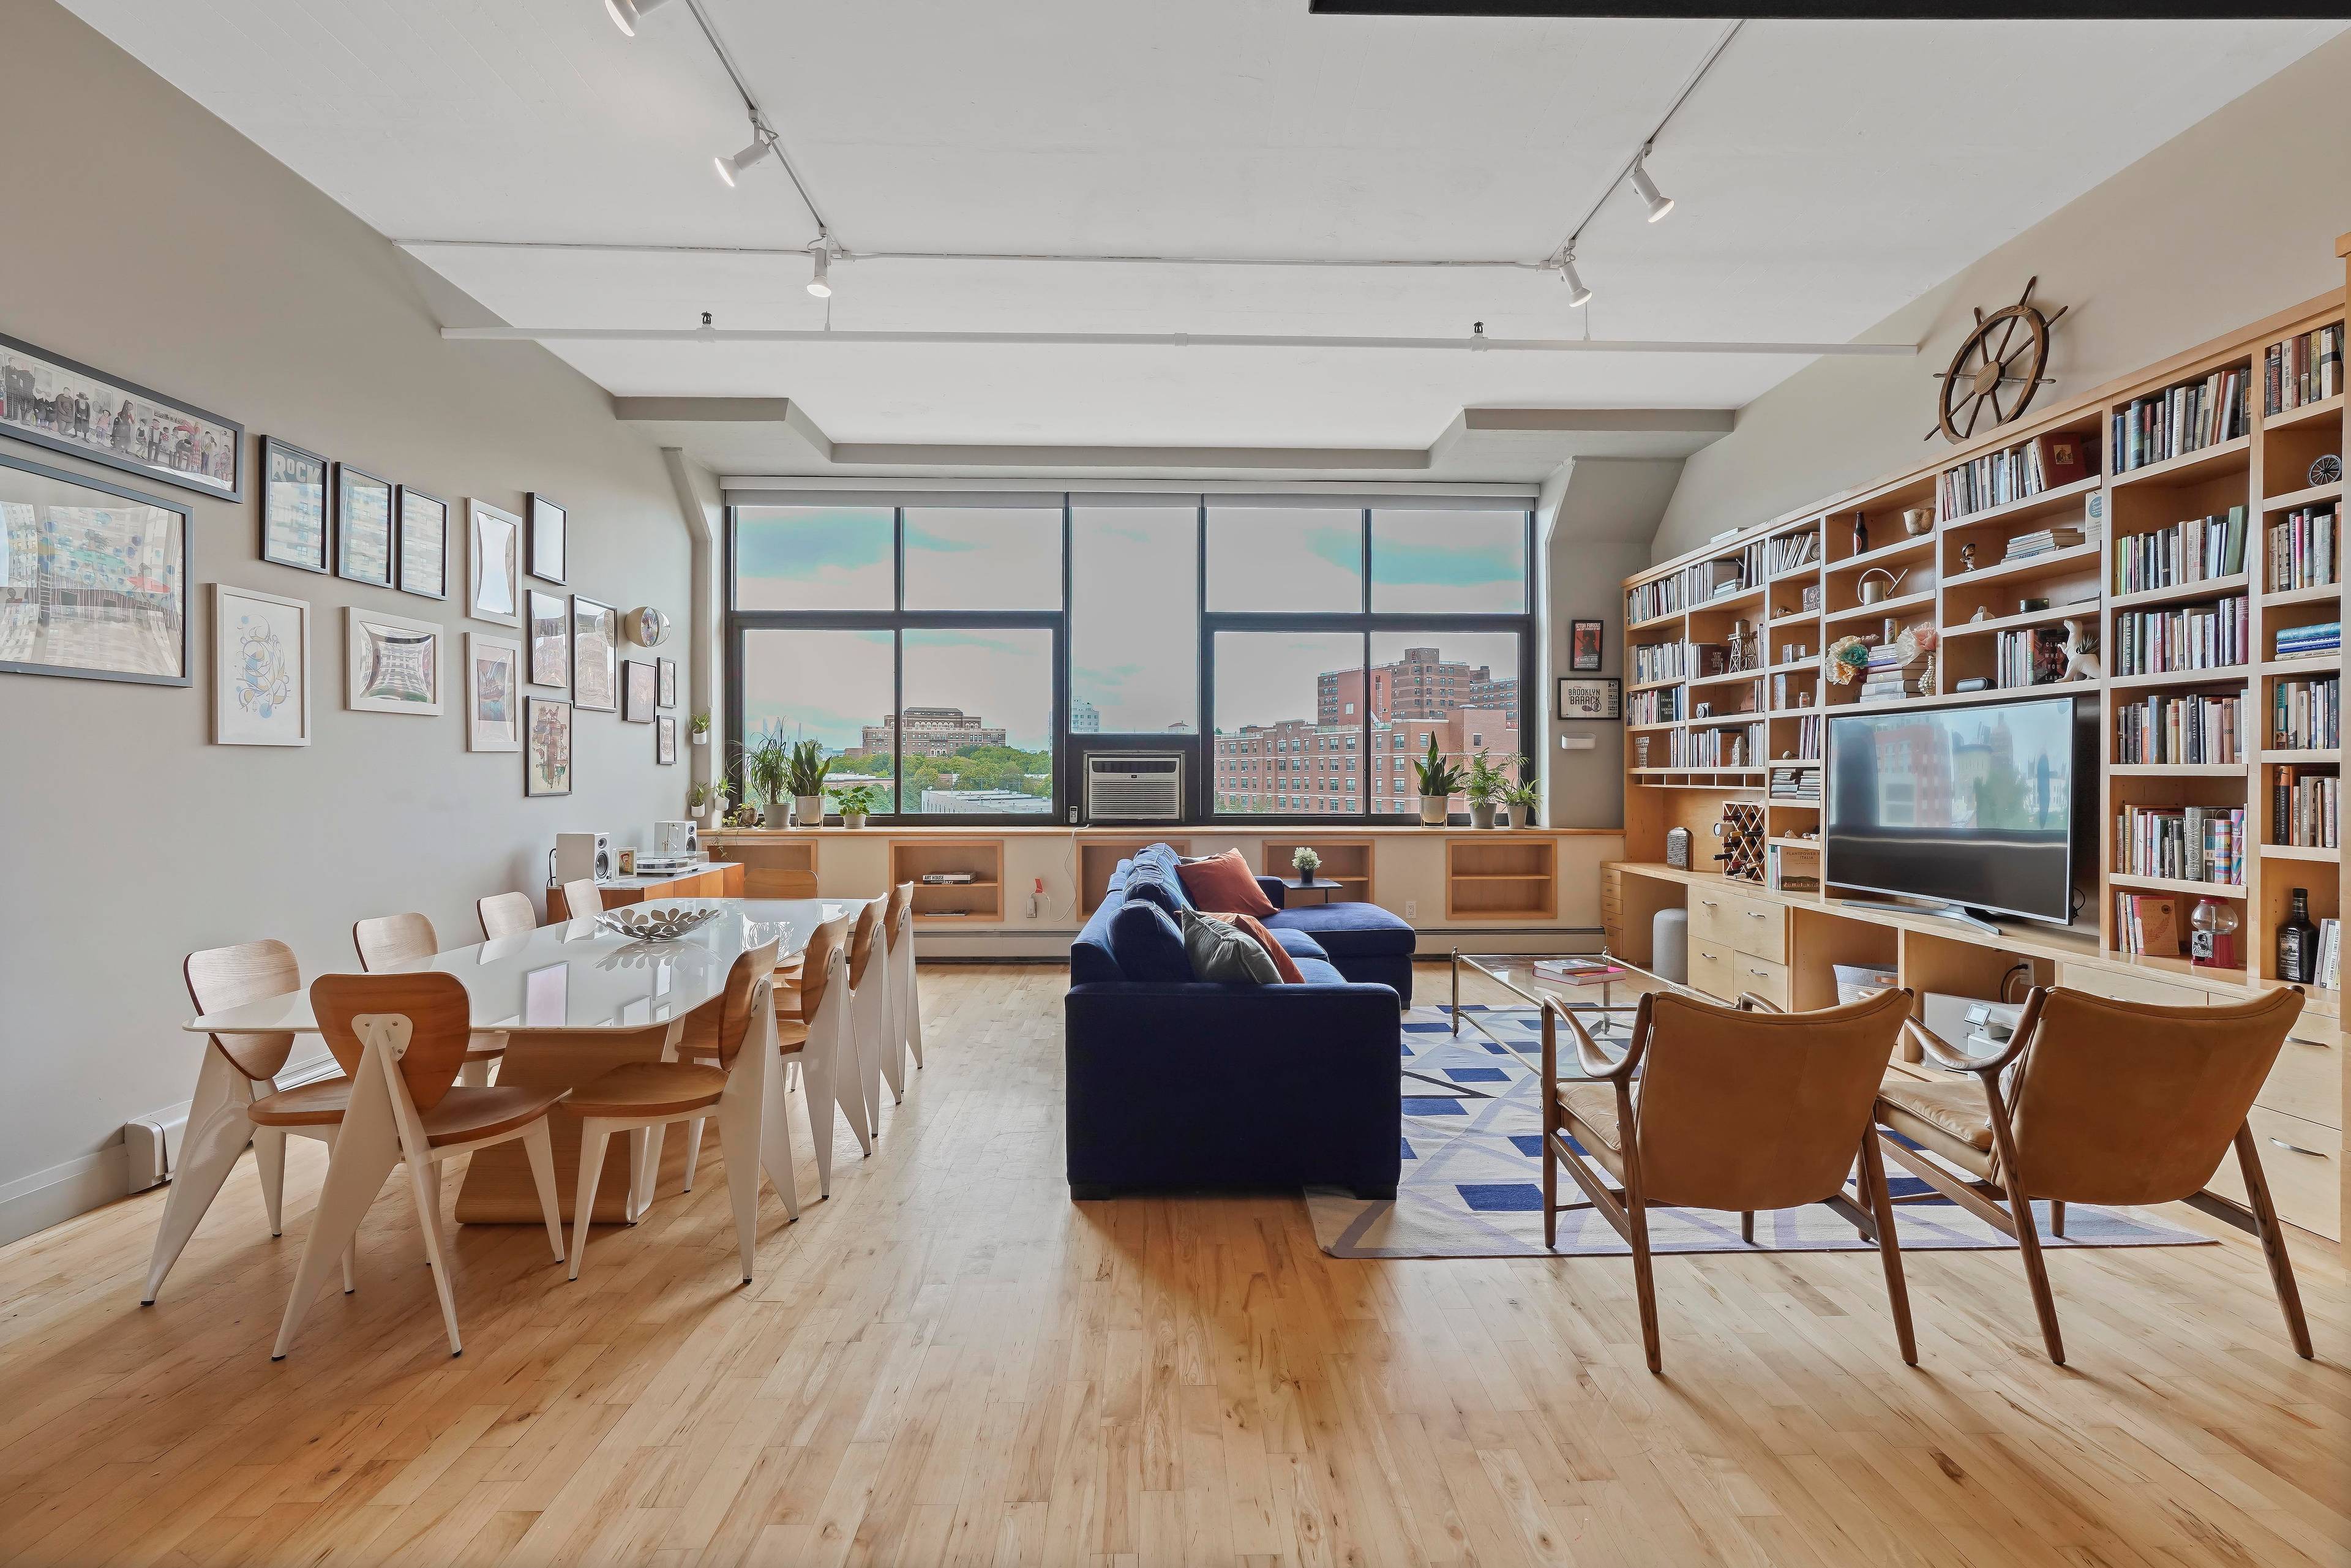 Residence 412 at 535 Dean Street is a converted 2 BR, 1 Bath condominium which features an open floorplan that creates a loft like spatial feeling.